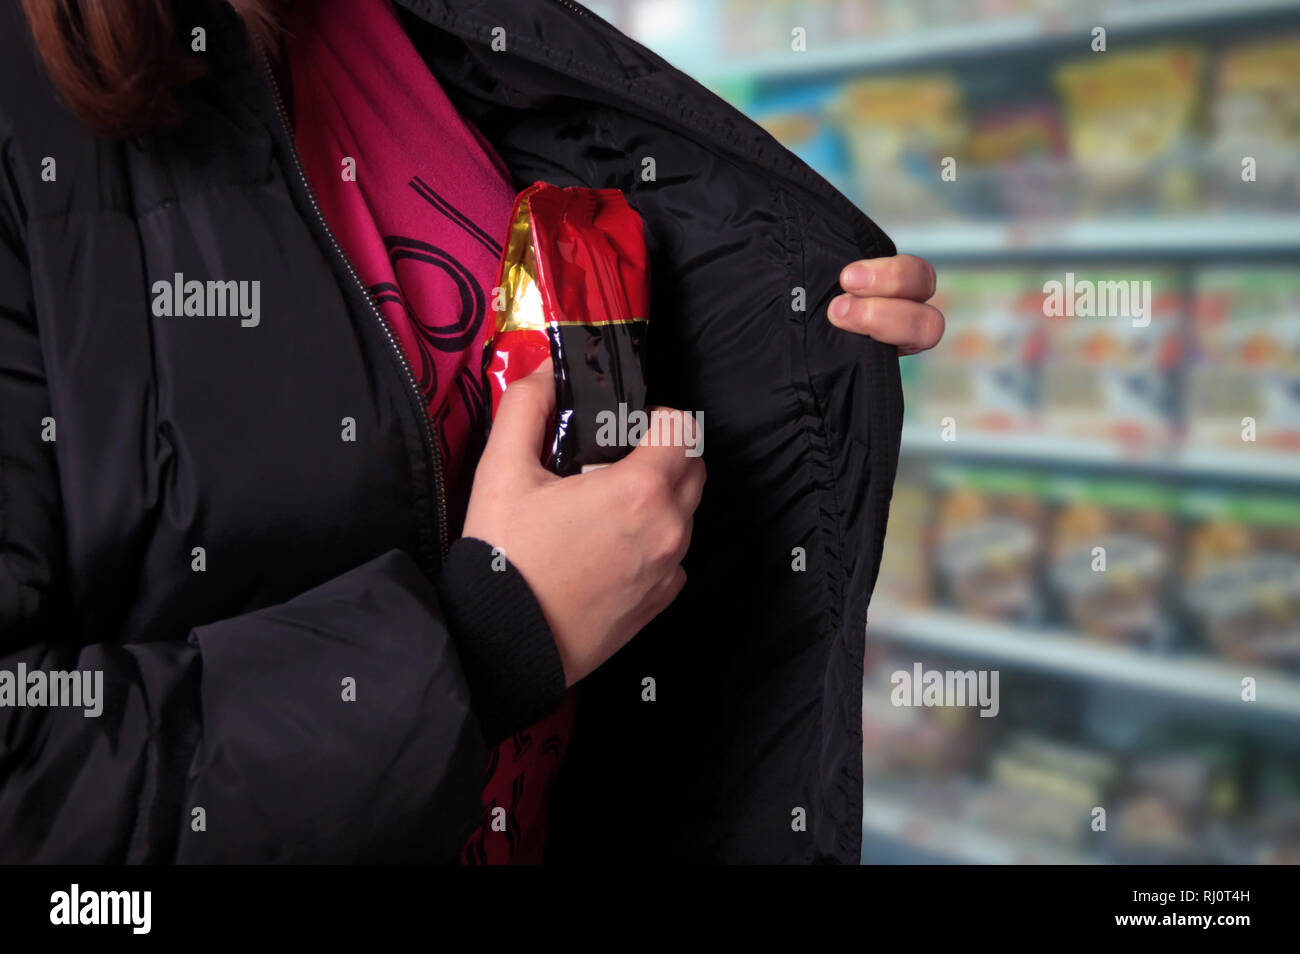 Woman shoplifting in a store Stock Photo